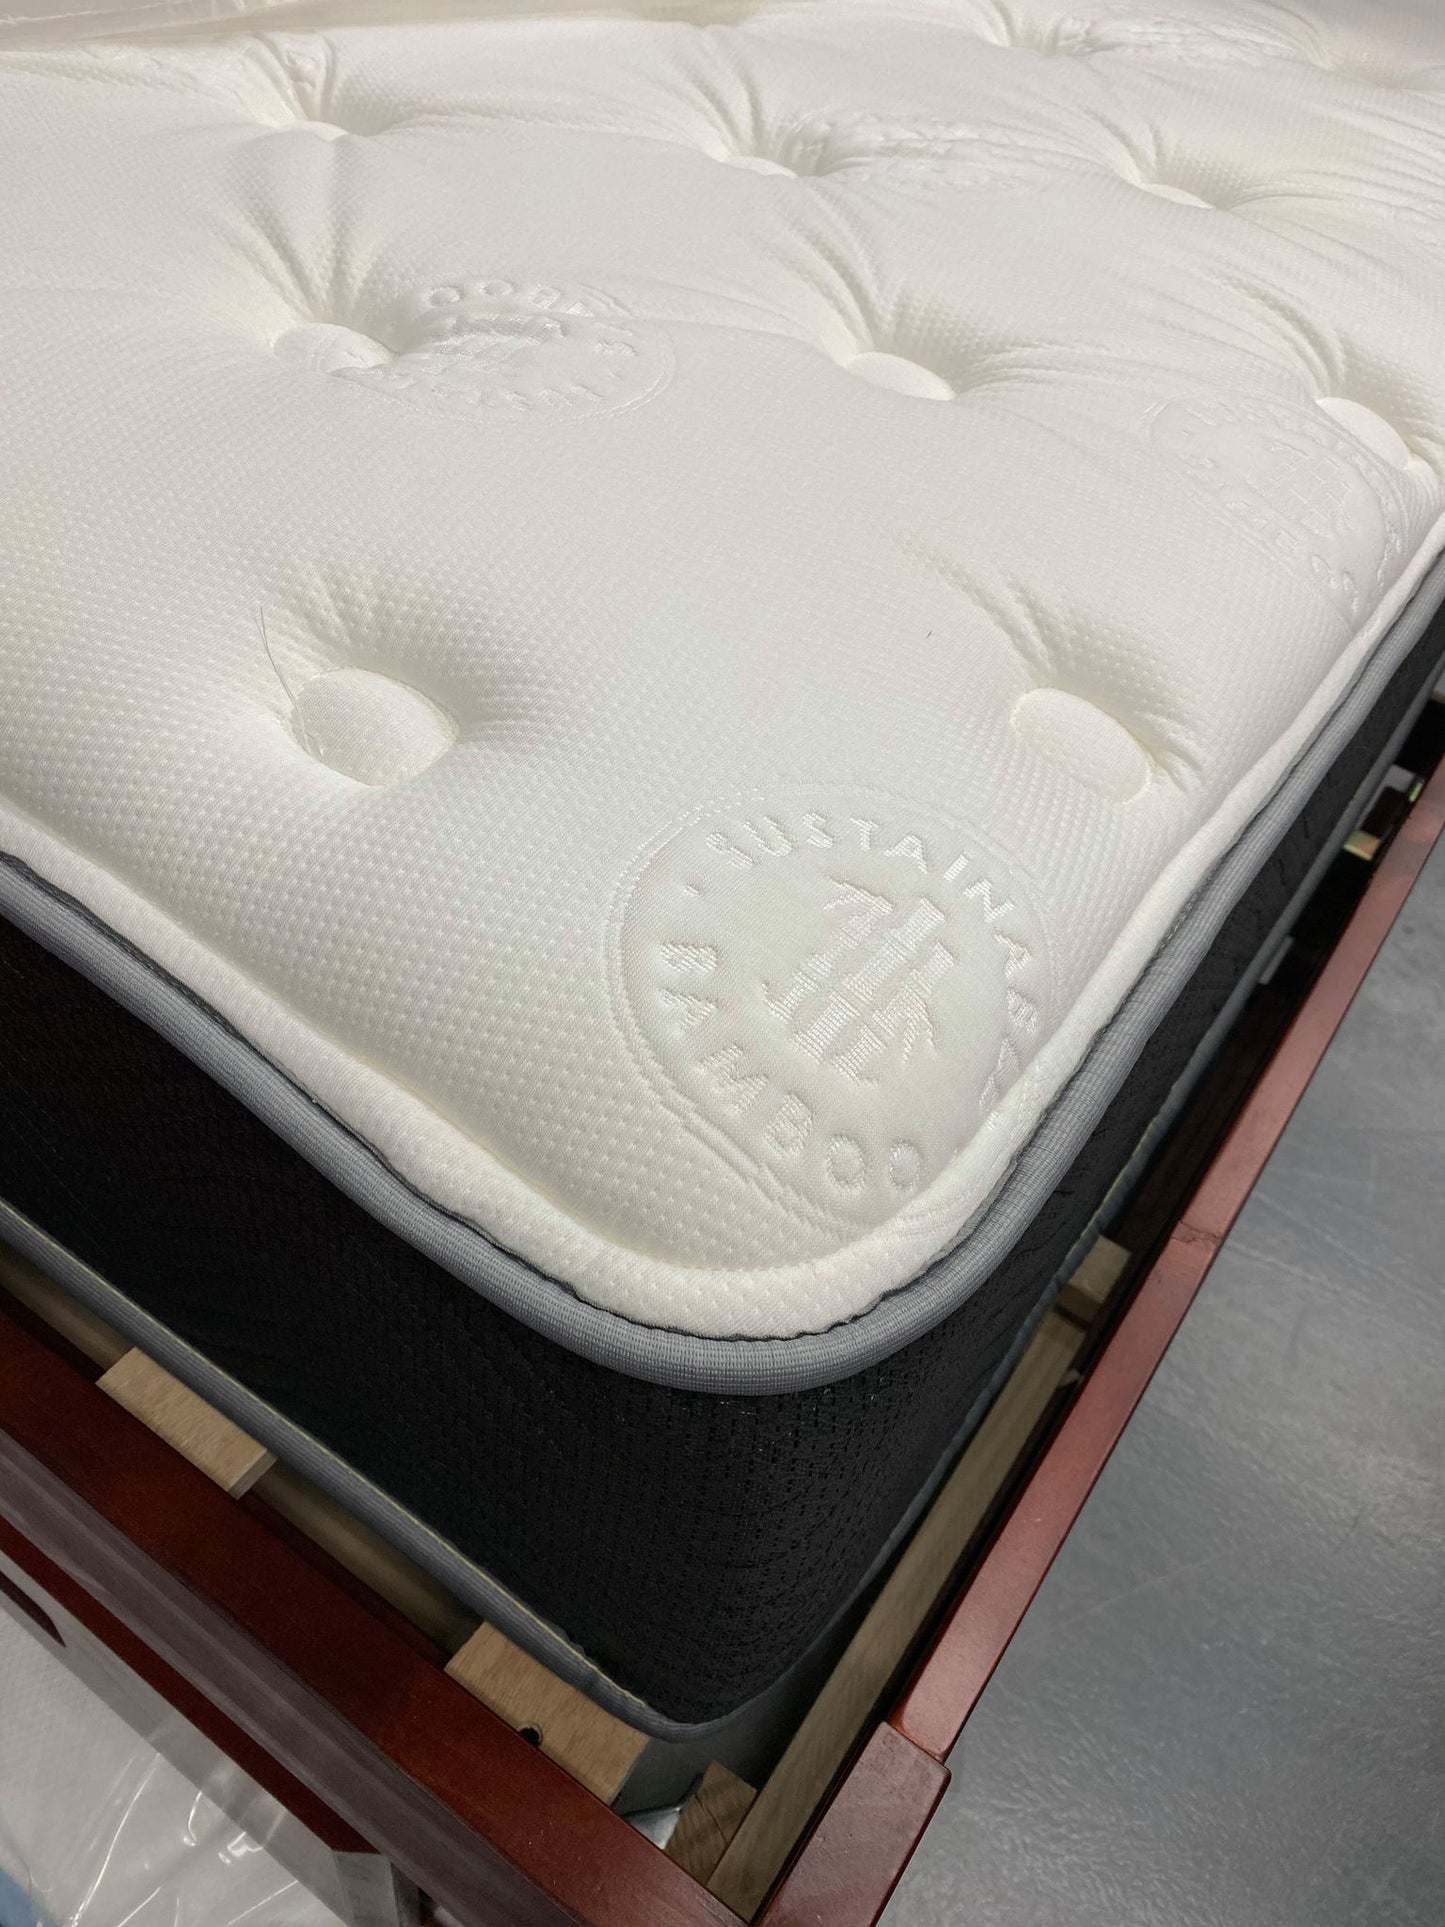 WEEKLY or MONTHLY. Silver Bamboo Full Mattress